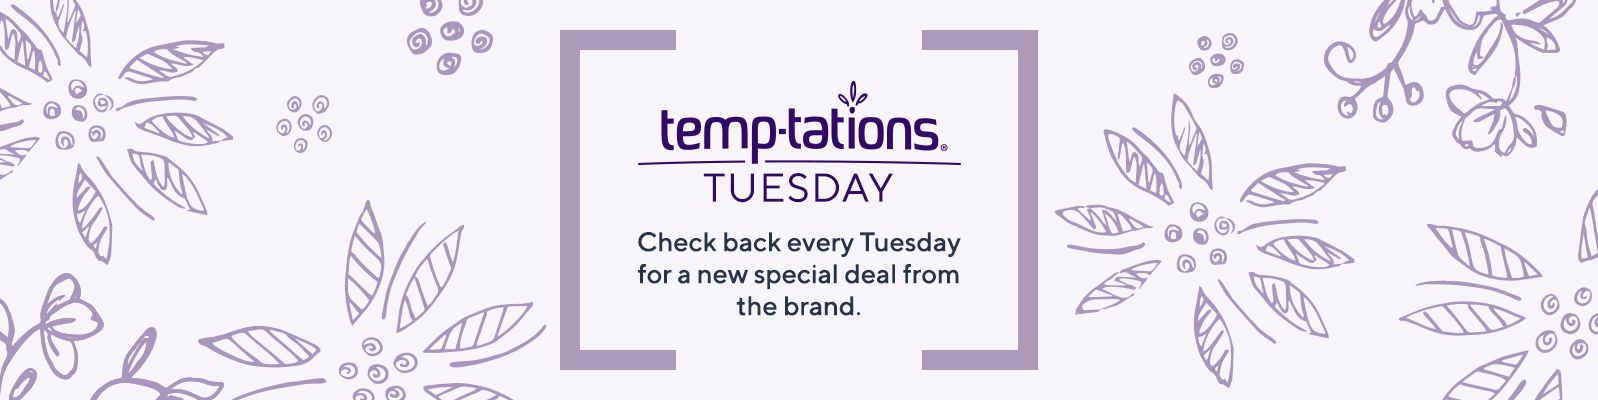 Temp-tations® Tuesday Check back every Tuesday for a new special deal from the brand. 